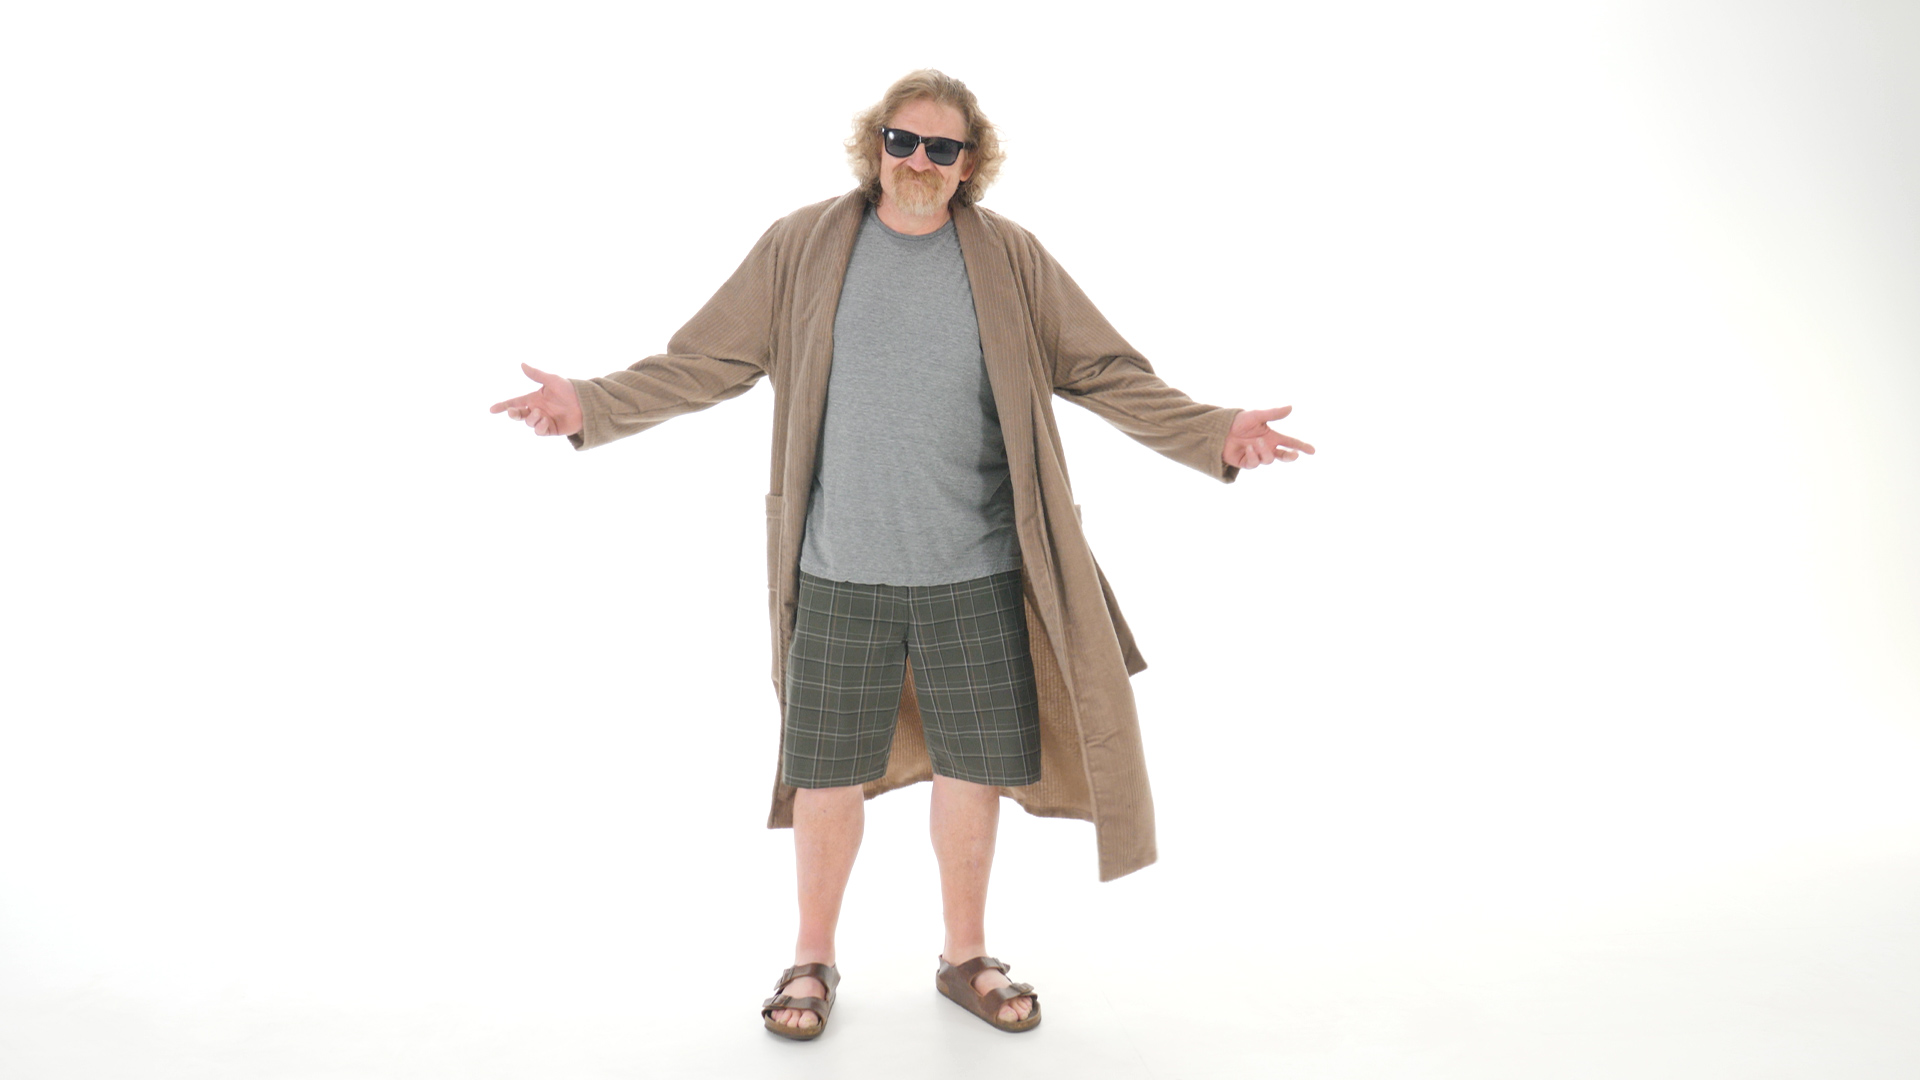 Who says you can't go grocery shopping in your bathrobe? Definitely not The Dude! Get this exclusive The Big Lebowski The Dude Bathrobe and show everyone that it's perfectly acceptable to wear your bathrobe in public.